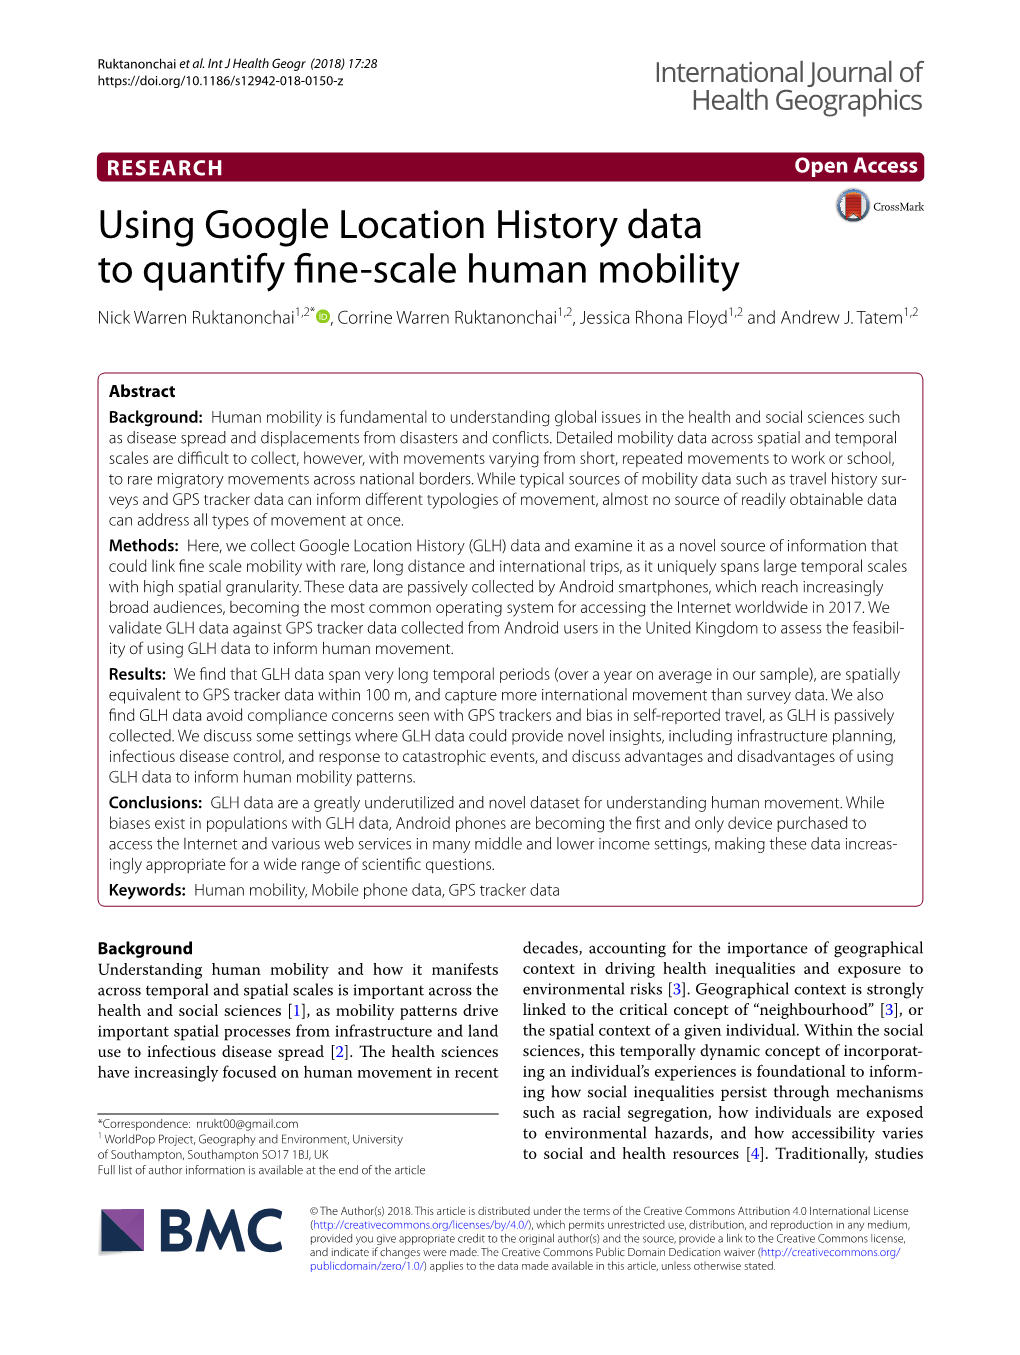 Using Google Location History Data to Quantify Fine-Scale Human Mobility